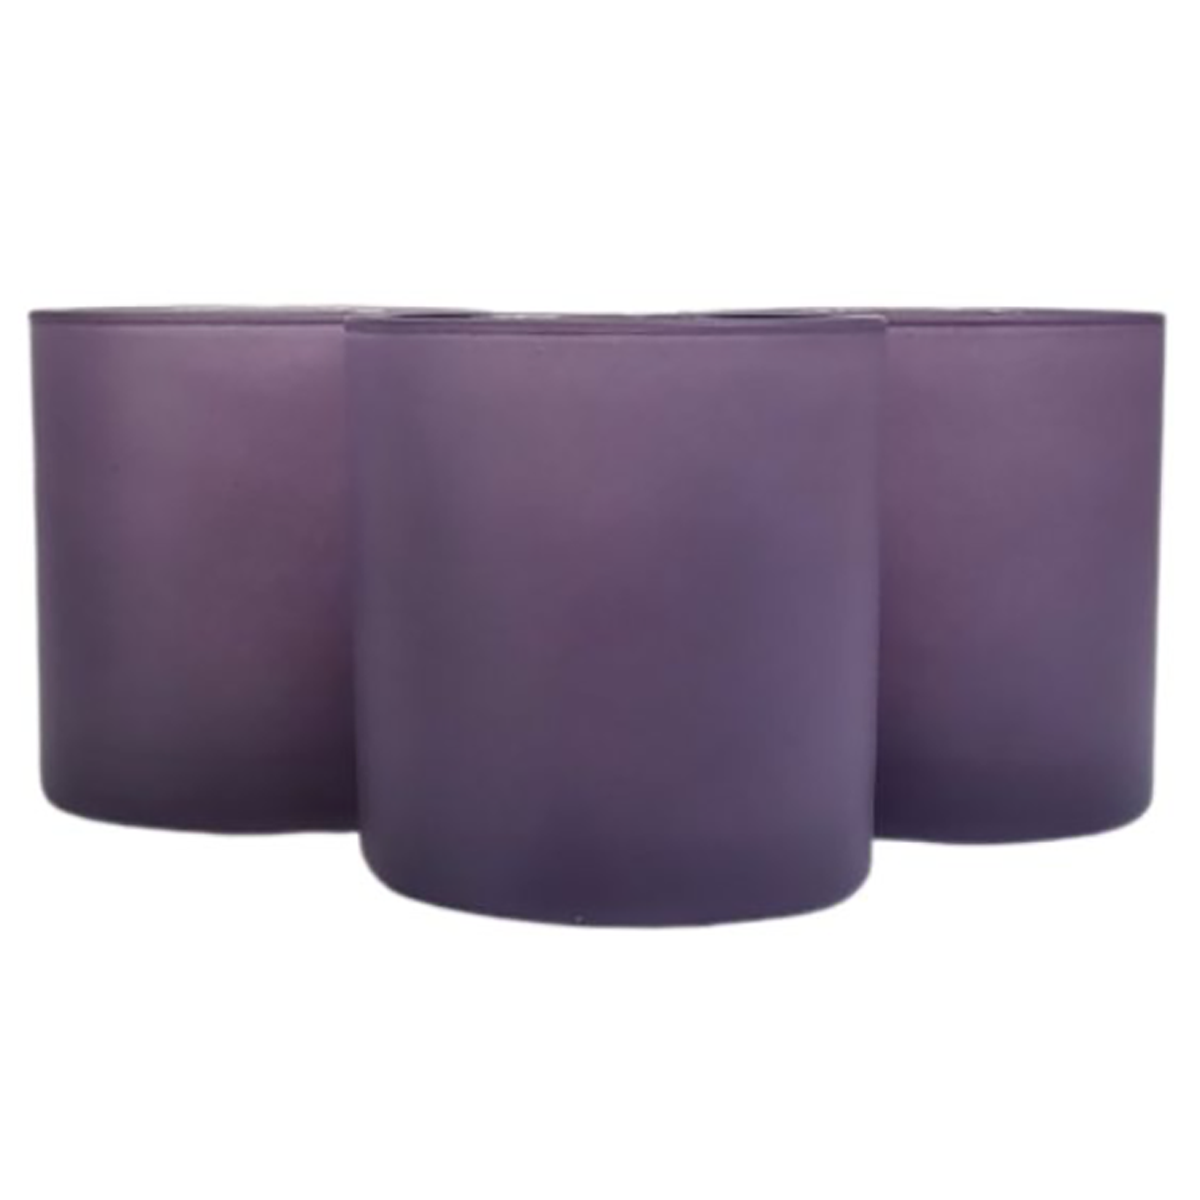 Monticiano candle vessels Frosted Lavender Side by Side